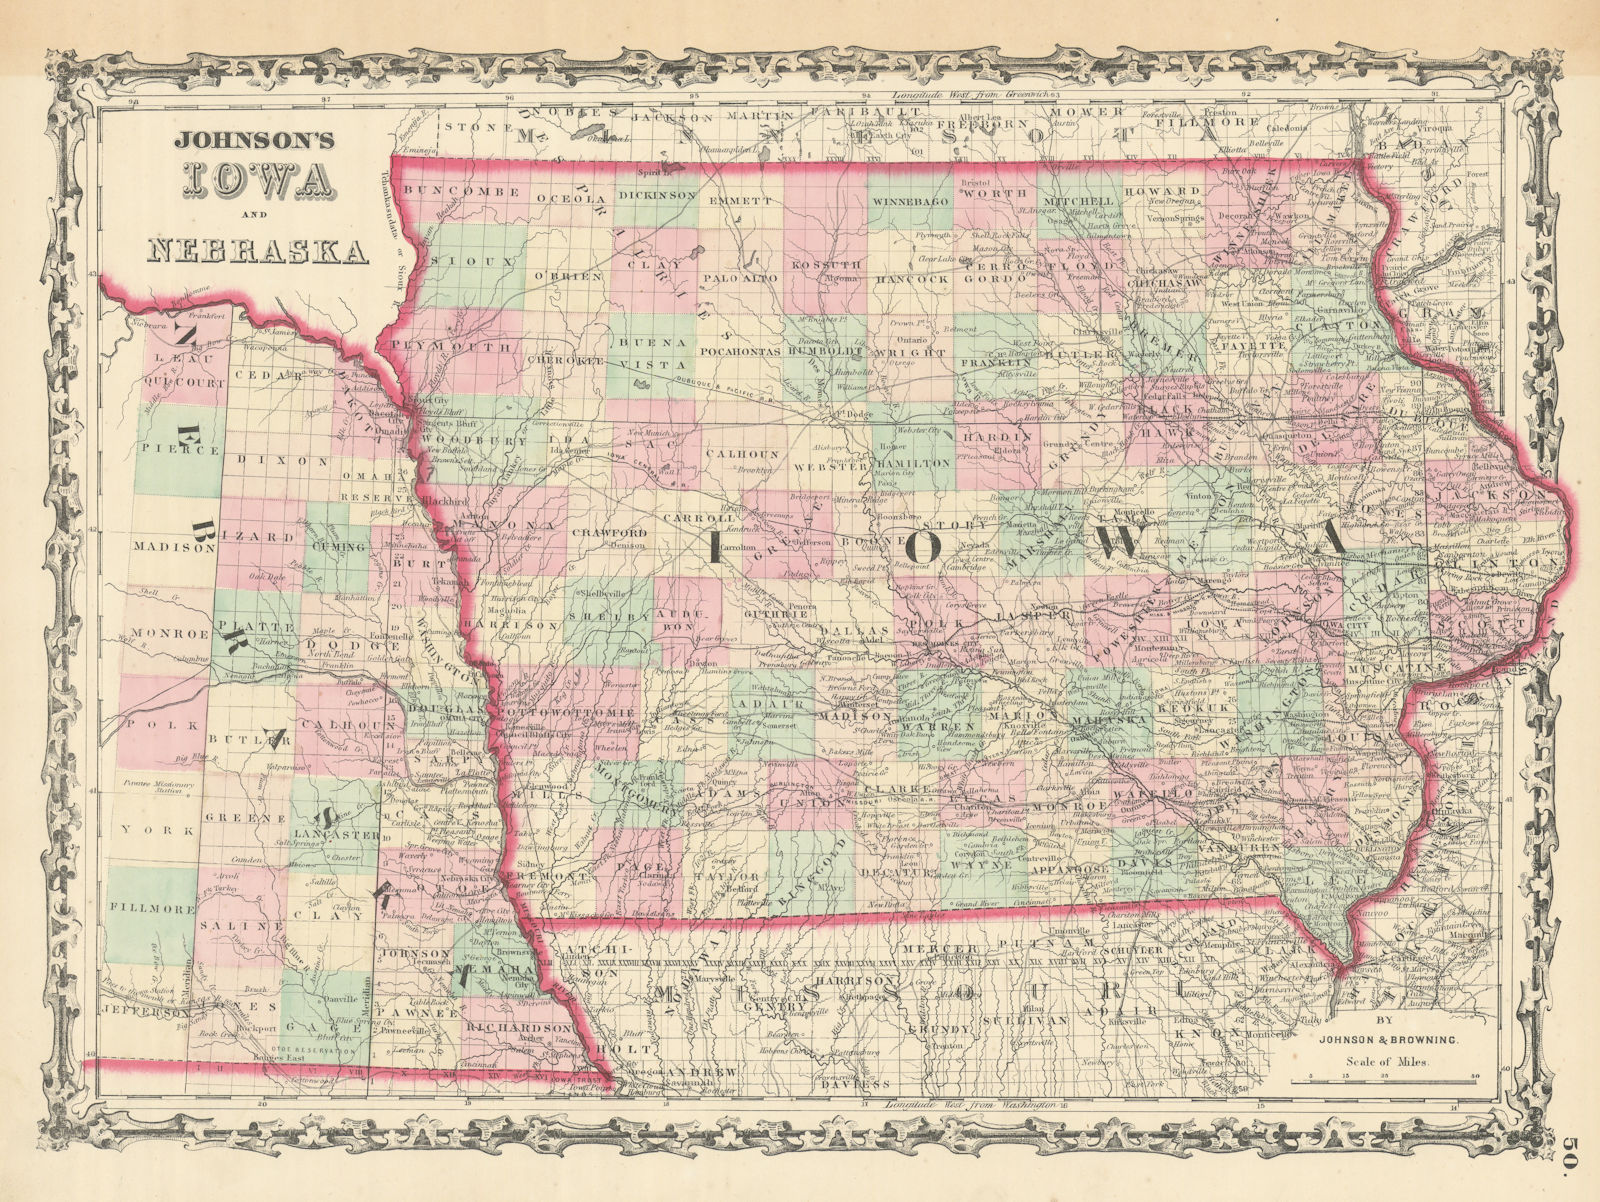 Associate Product Johnson's Iowa & Nebraska. US state map showing counties 1861 old antique